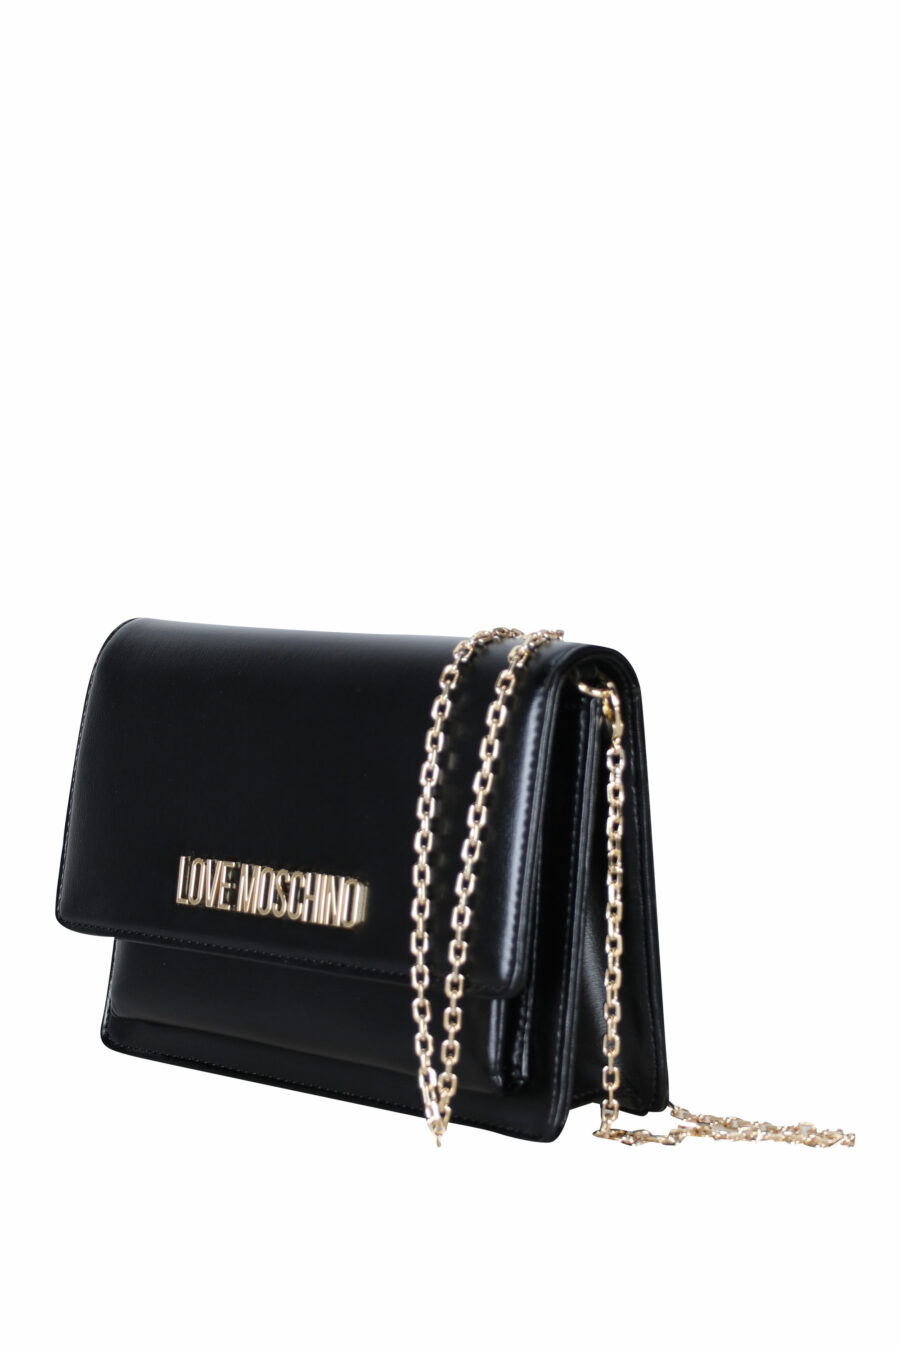 Black shoulder bag with gold lettering mini logo and chain - 8050142975010 1